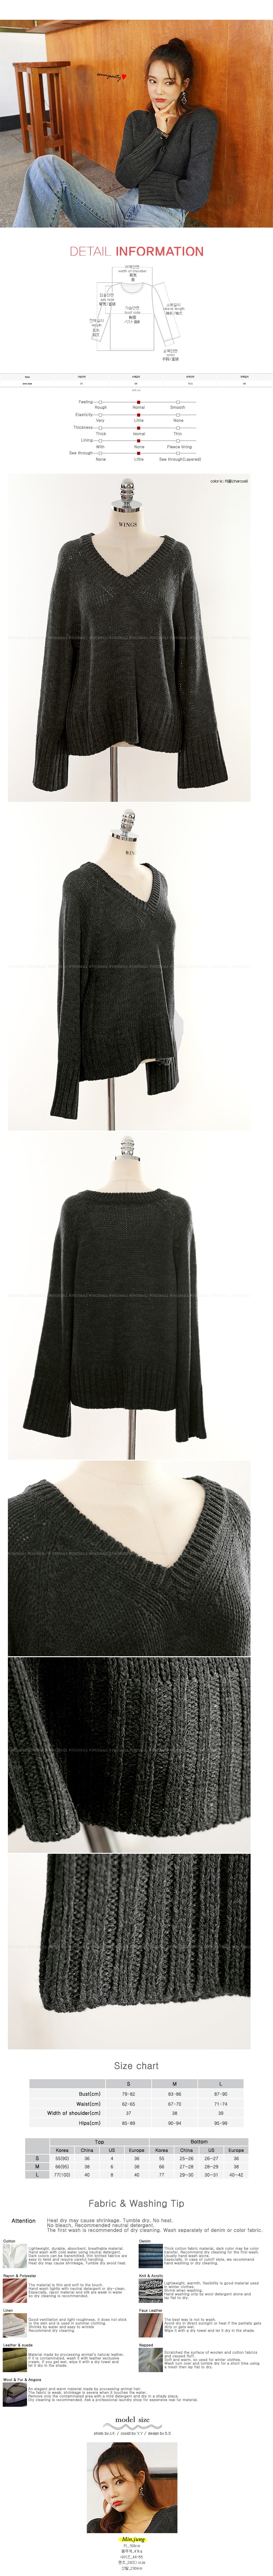 V-Neck Sweater #Charcoal One Size(S-M)